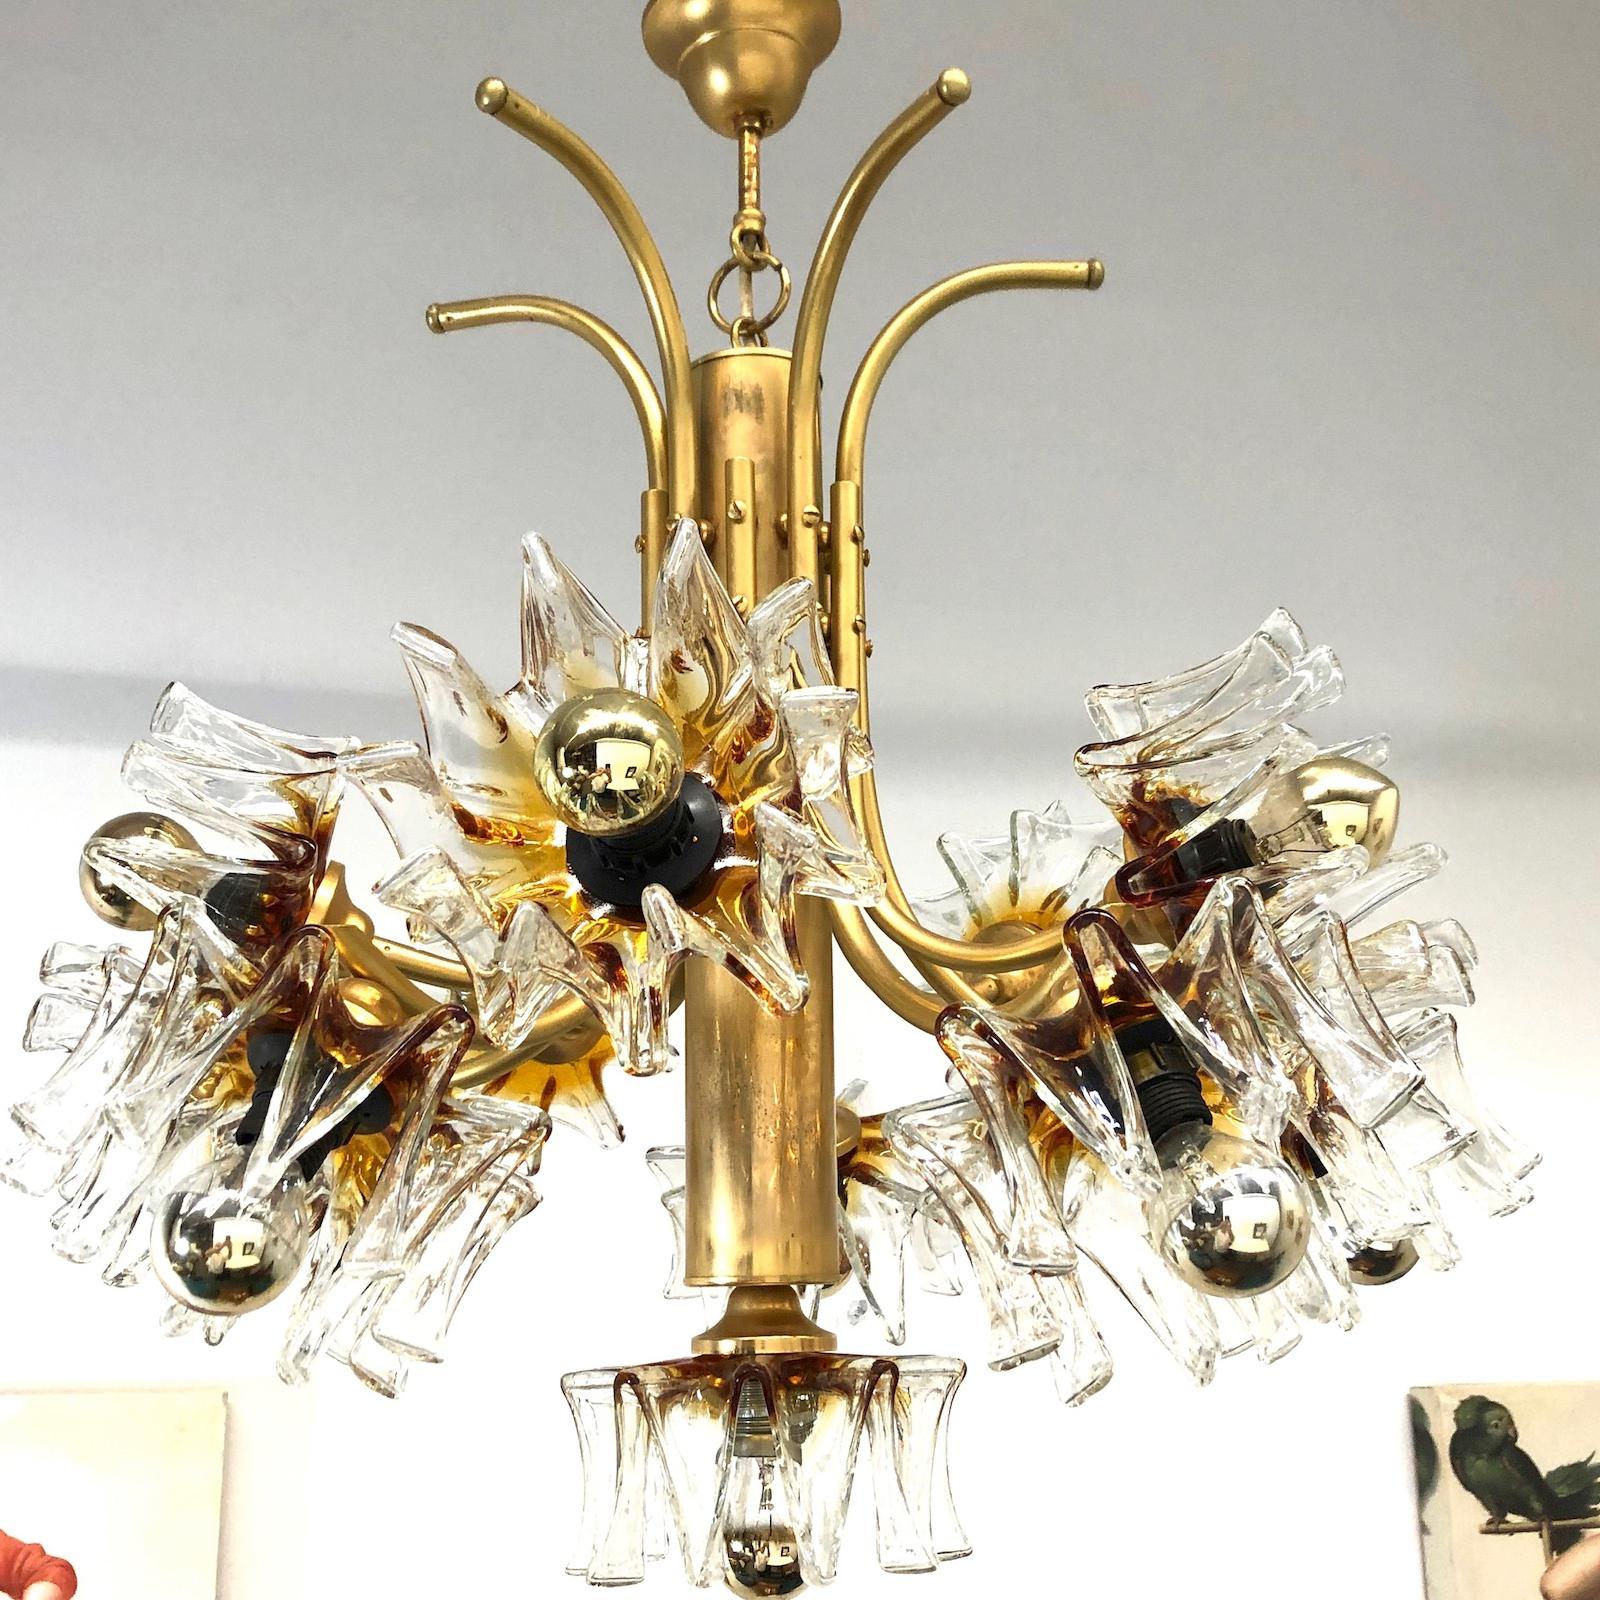 Very rare and beautiful chandelier. Made by Mazzega, Italy, 1970s. The Chandelier requires eleven European E14 candelabra bulbs, each up to 40 watts. It is tarnished and in as found condition, after polishing it is a real treasure and gives any room